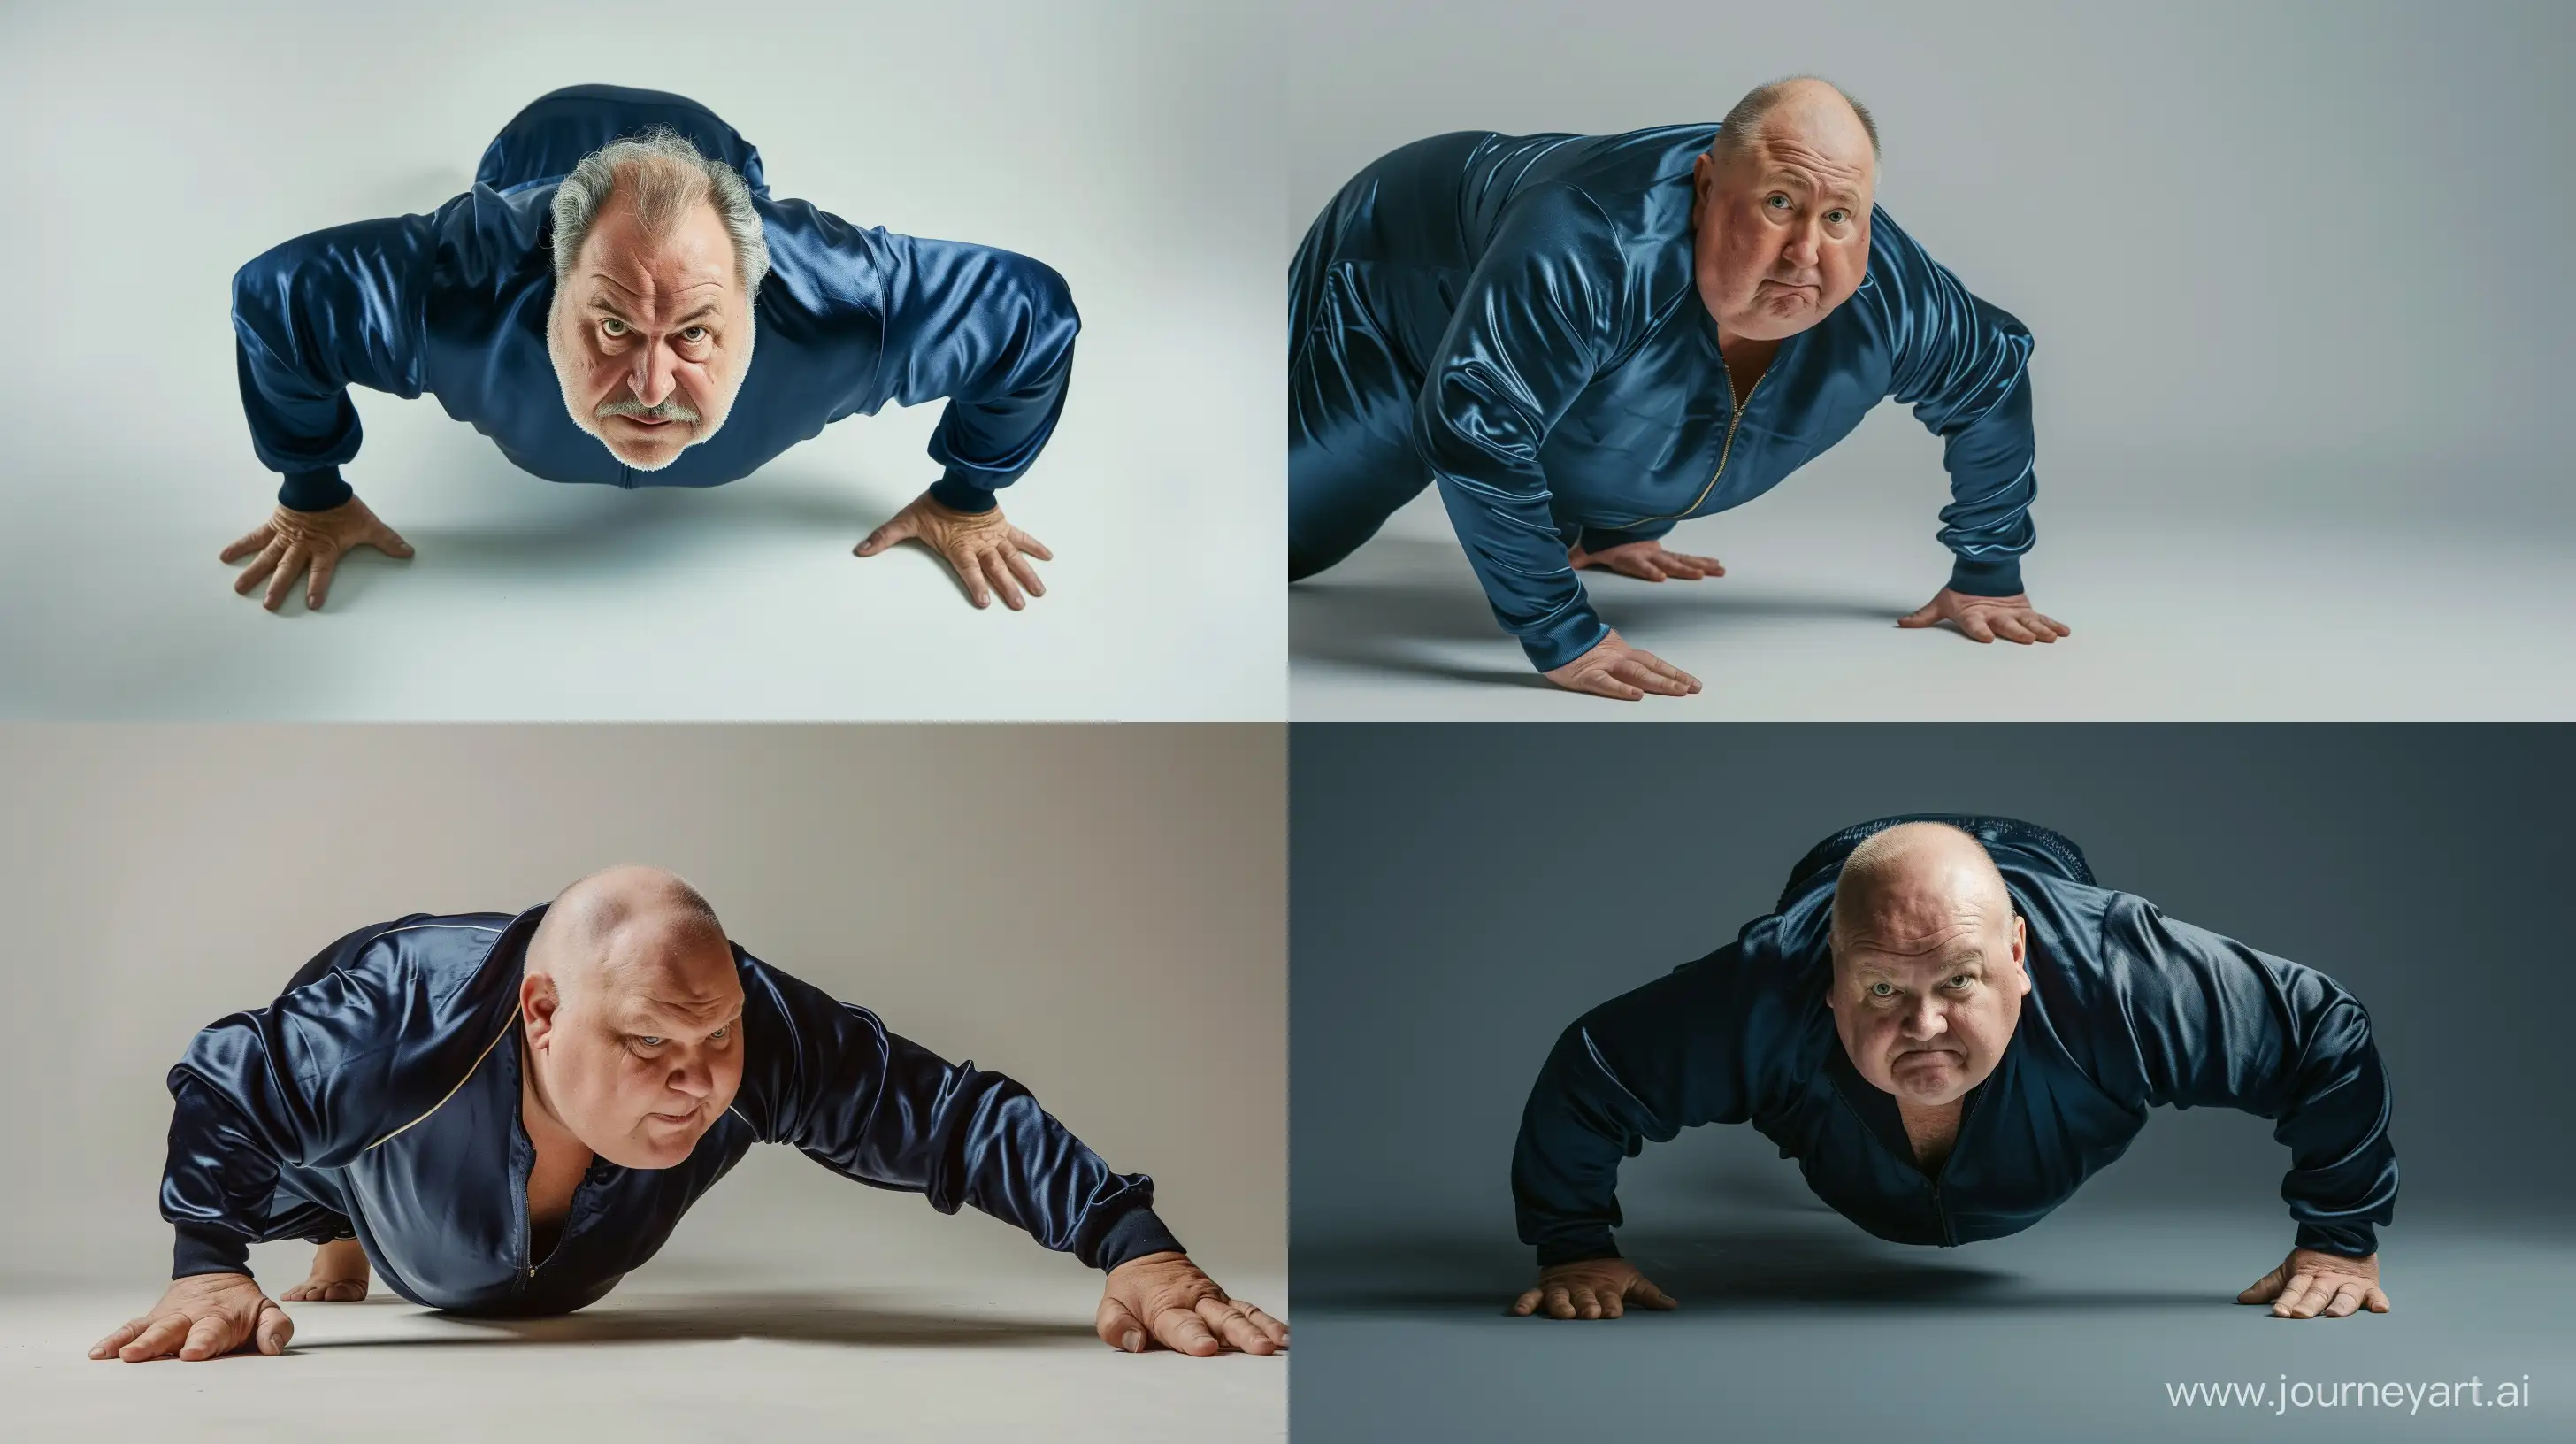 Energetic-Fitness-Candid-HighAngle-Shot-of-a-60YearOld-Man-in-Silk-Navy-Tracksuit-Doing-PushUps